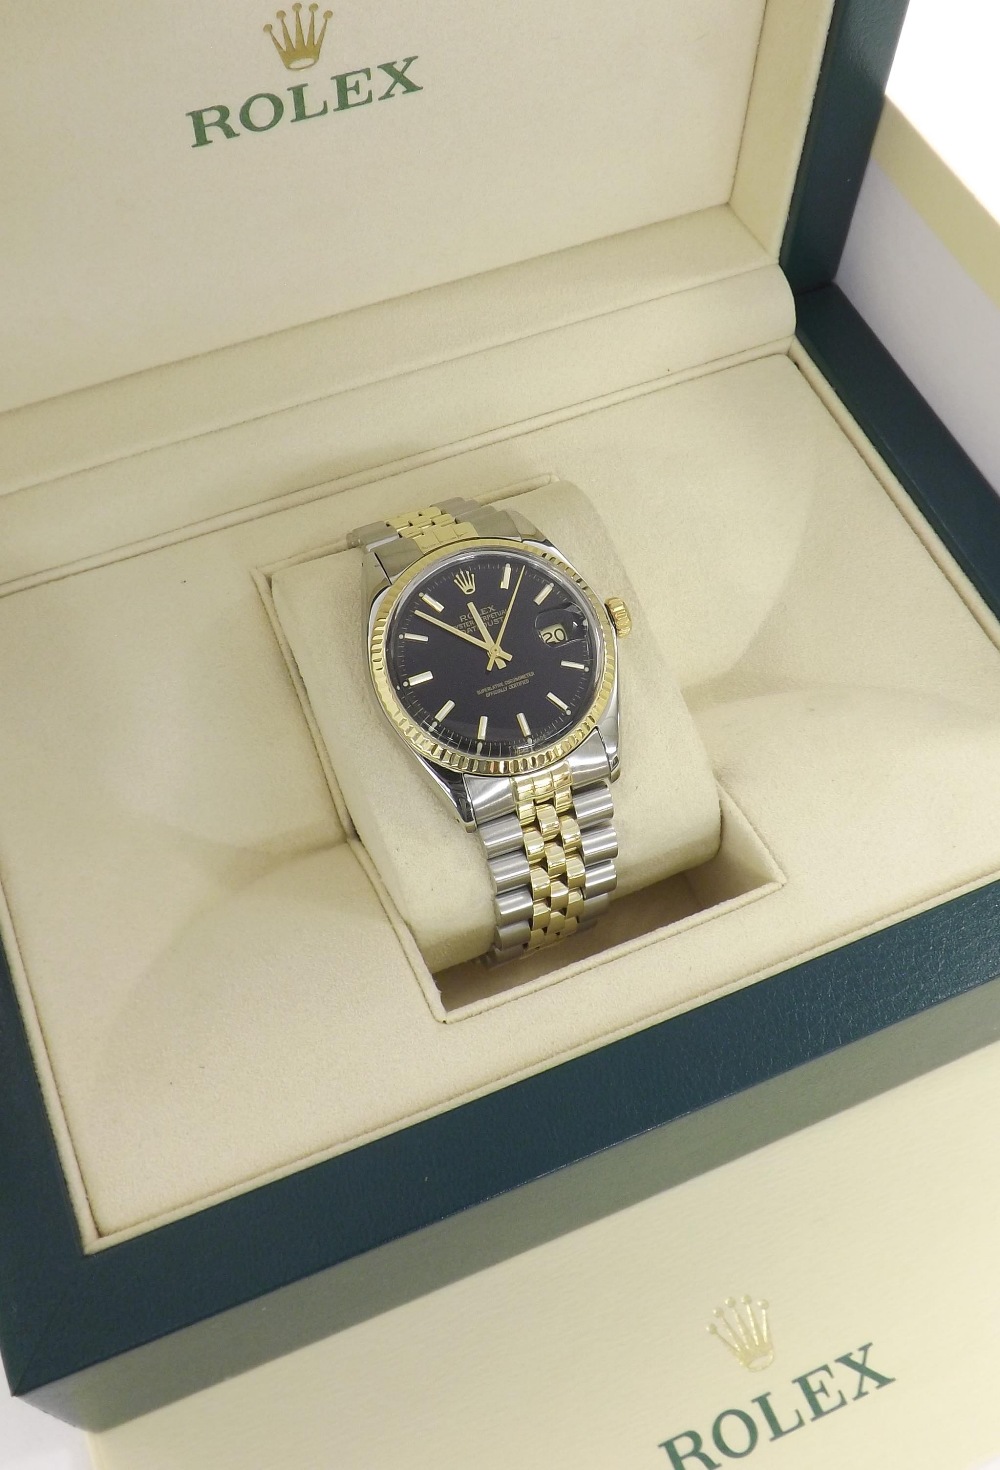 Rolex Oyster Perpetual Datejust stainless steel and gold gentleman's bracelet watch, ref. 1601,